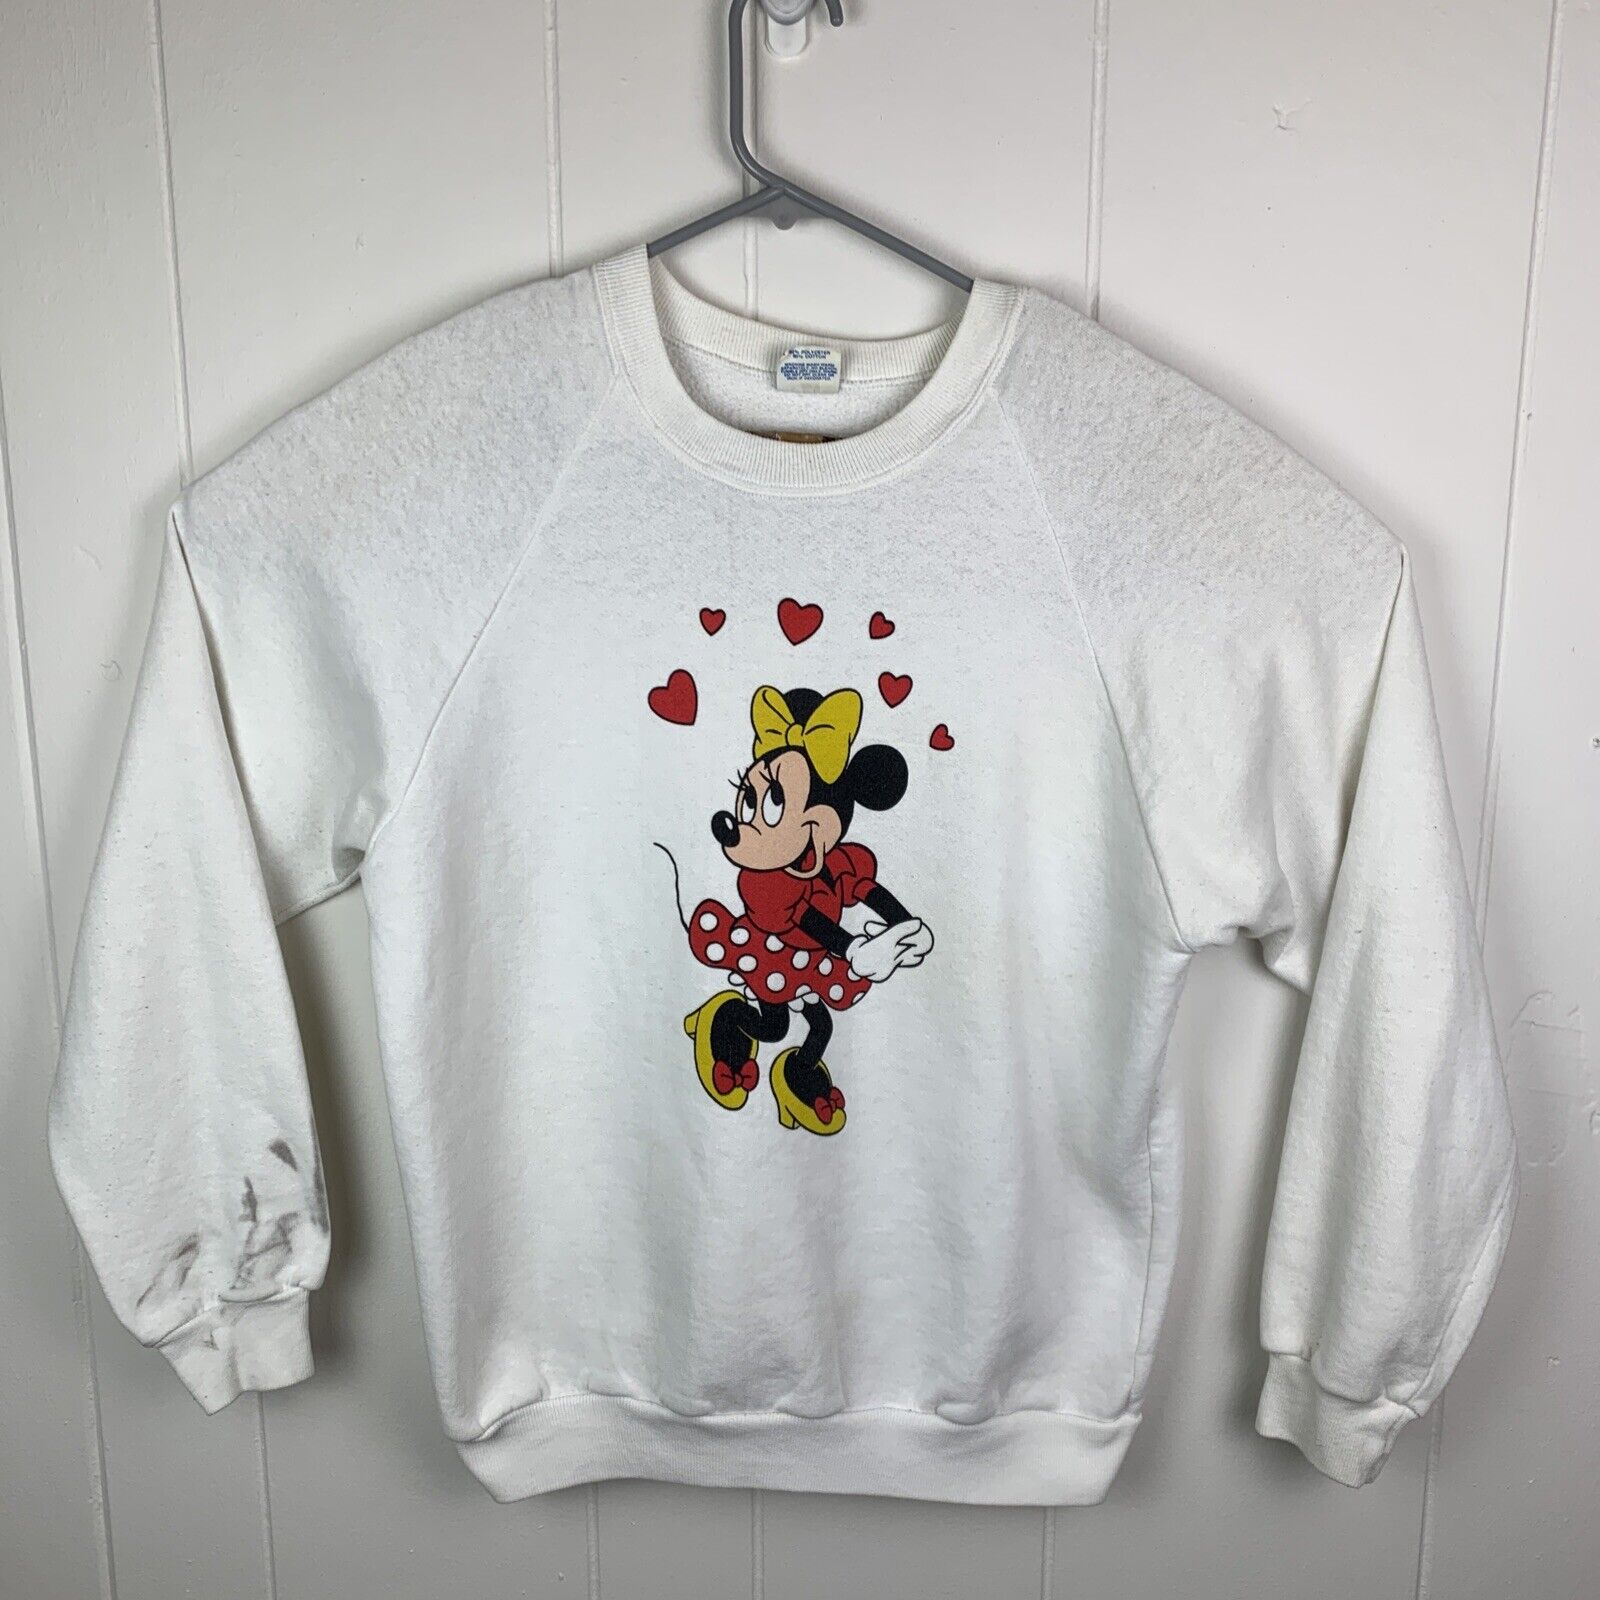 Vintage Minnie Mouse Sweatshirt White Unisex Large Made In USA